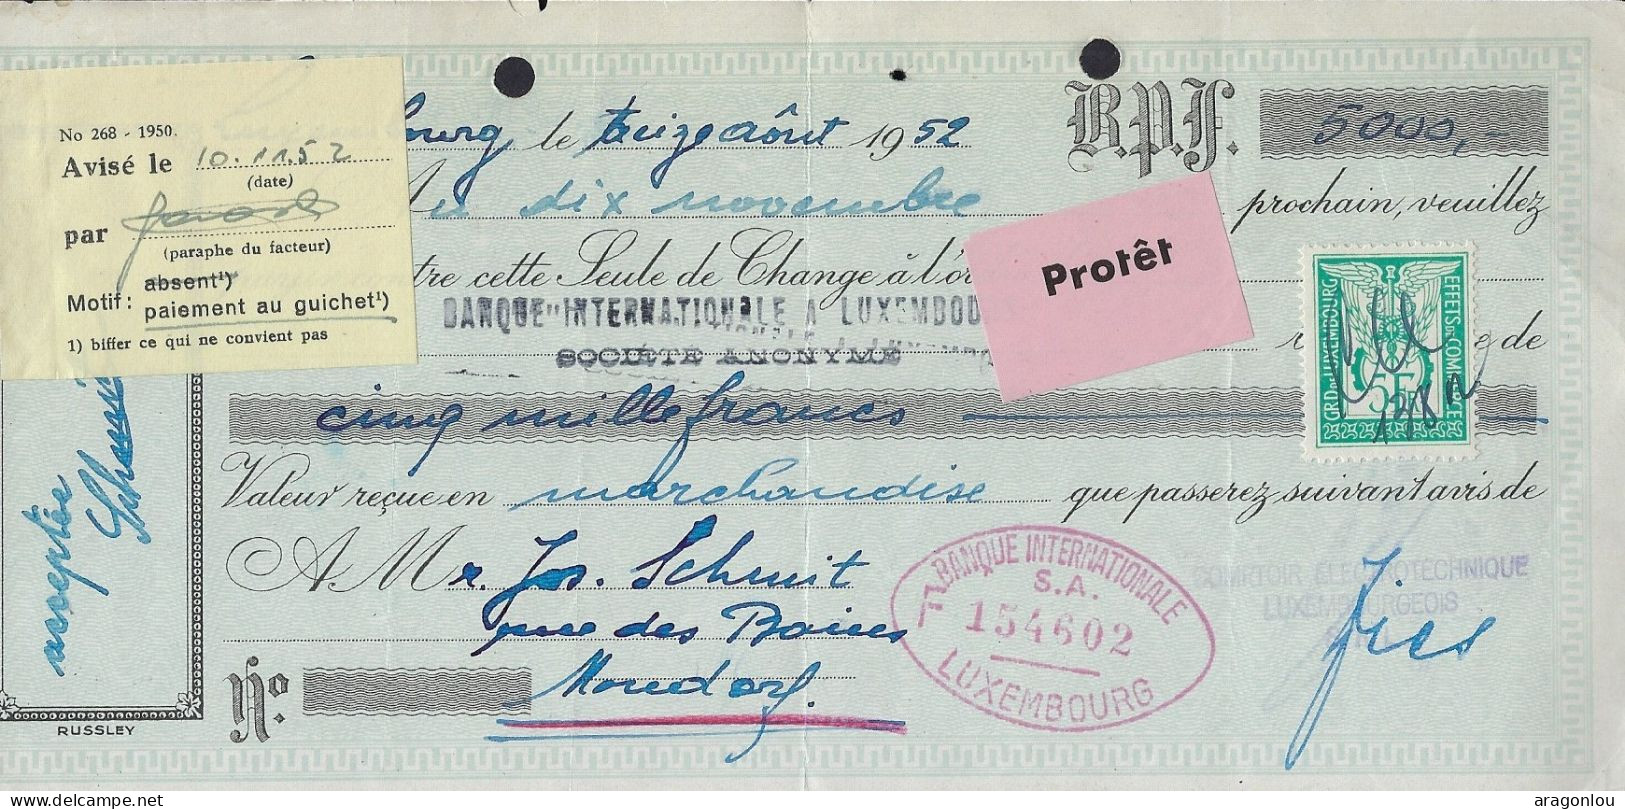 Luxembourg - Luxemburg - VIREMENT 1952   BANQUE INTERNATIONALE DE, LUXEMBOURG - Luxembourg